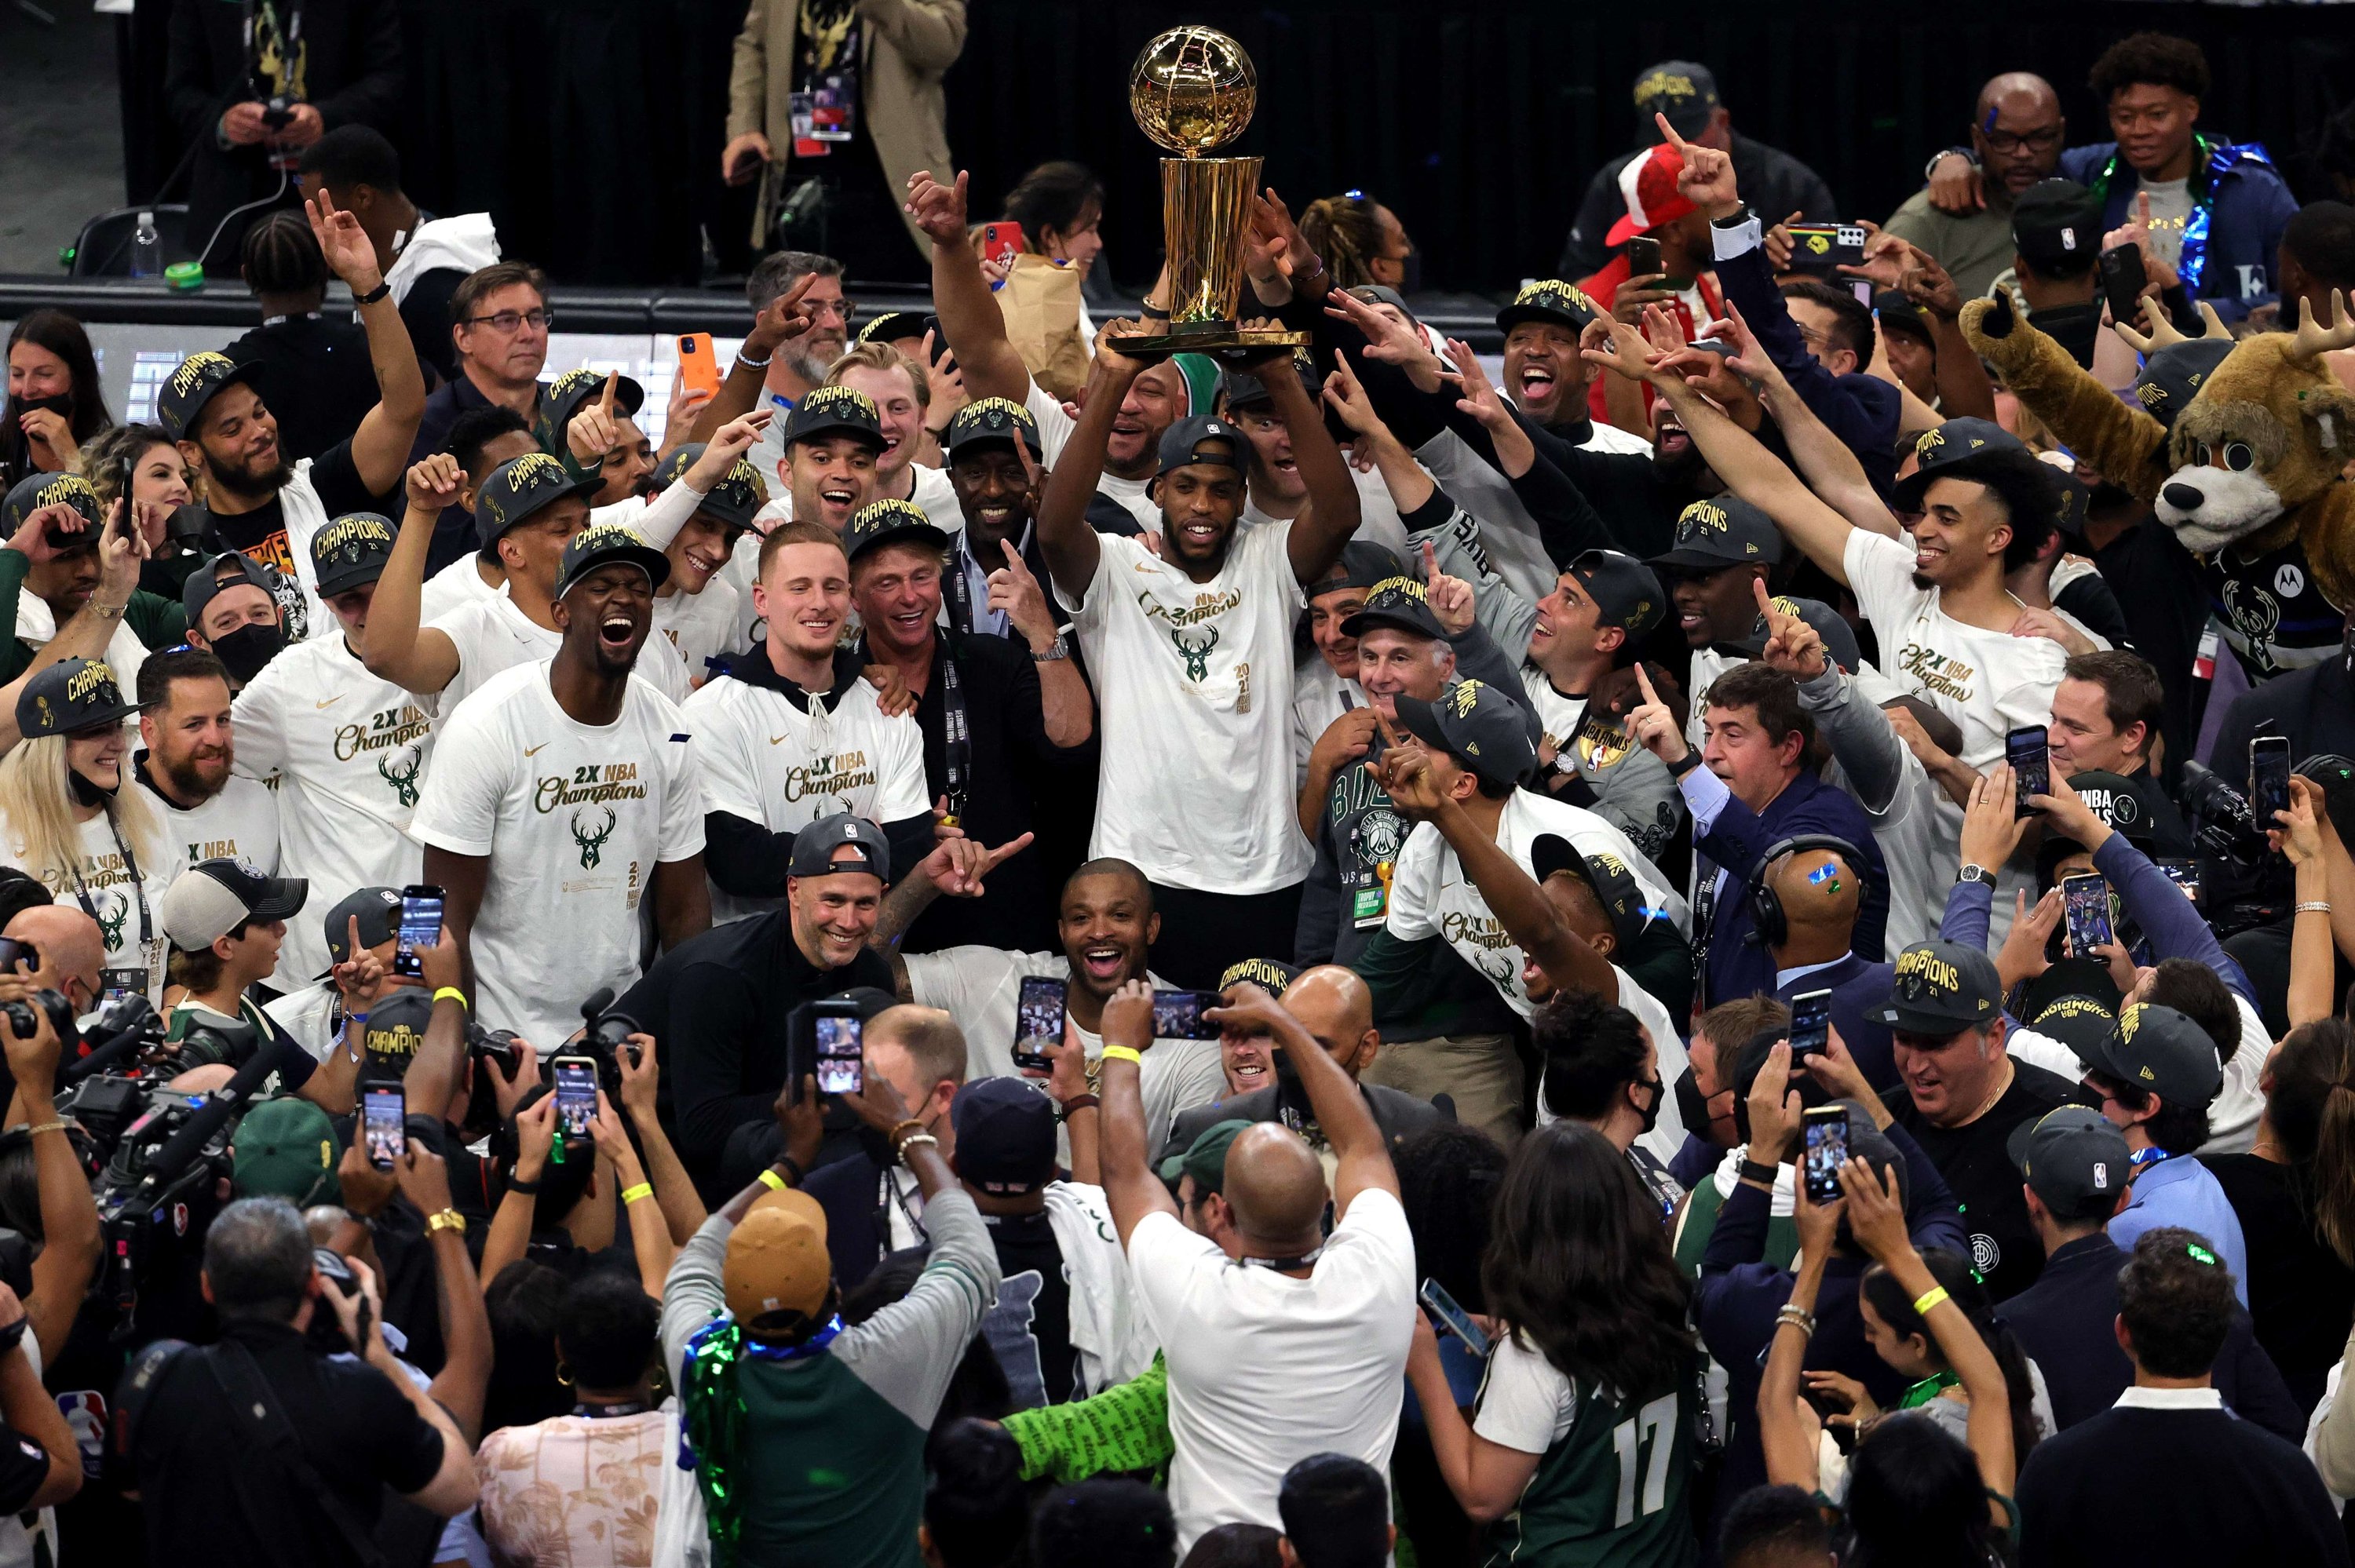 Bucks win first NBA championship in 50 years after beating Suns